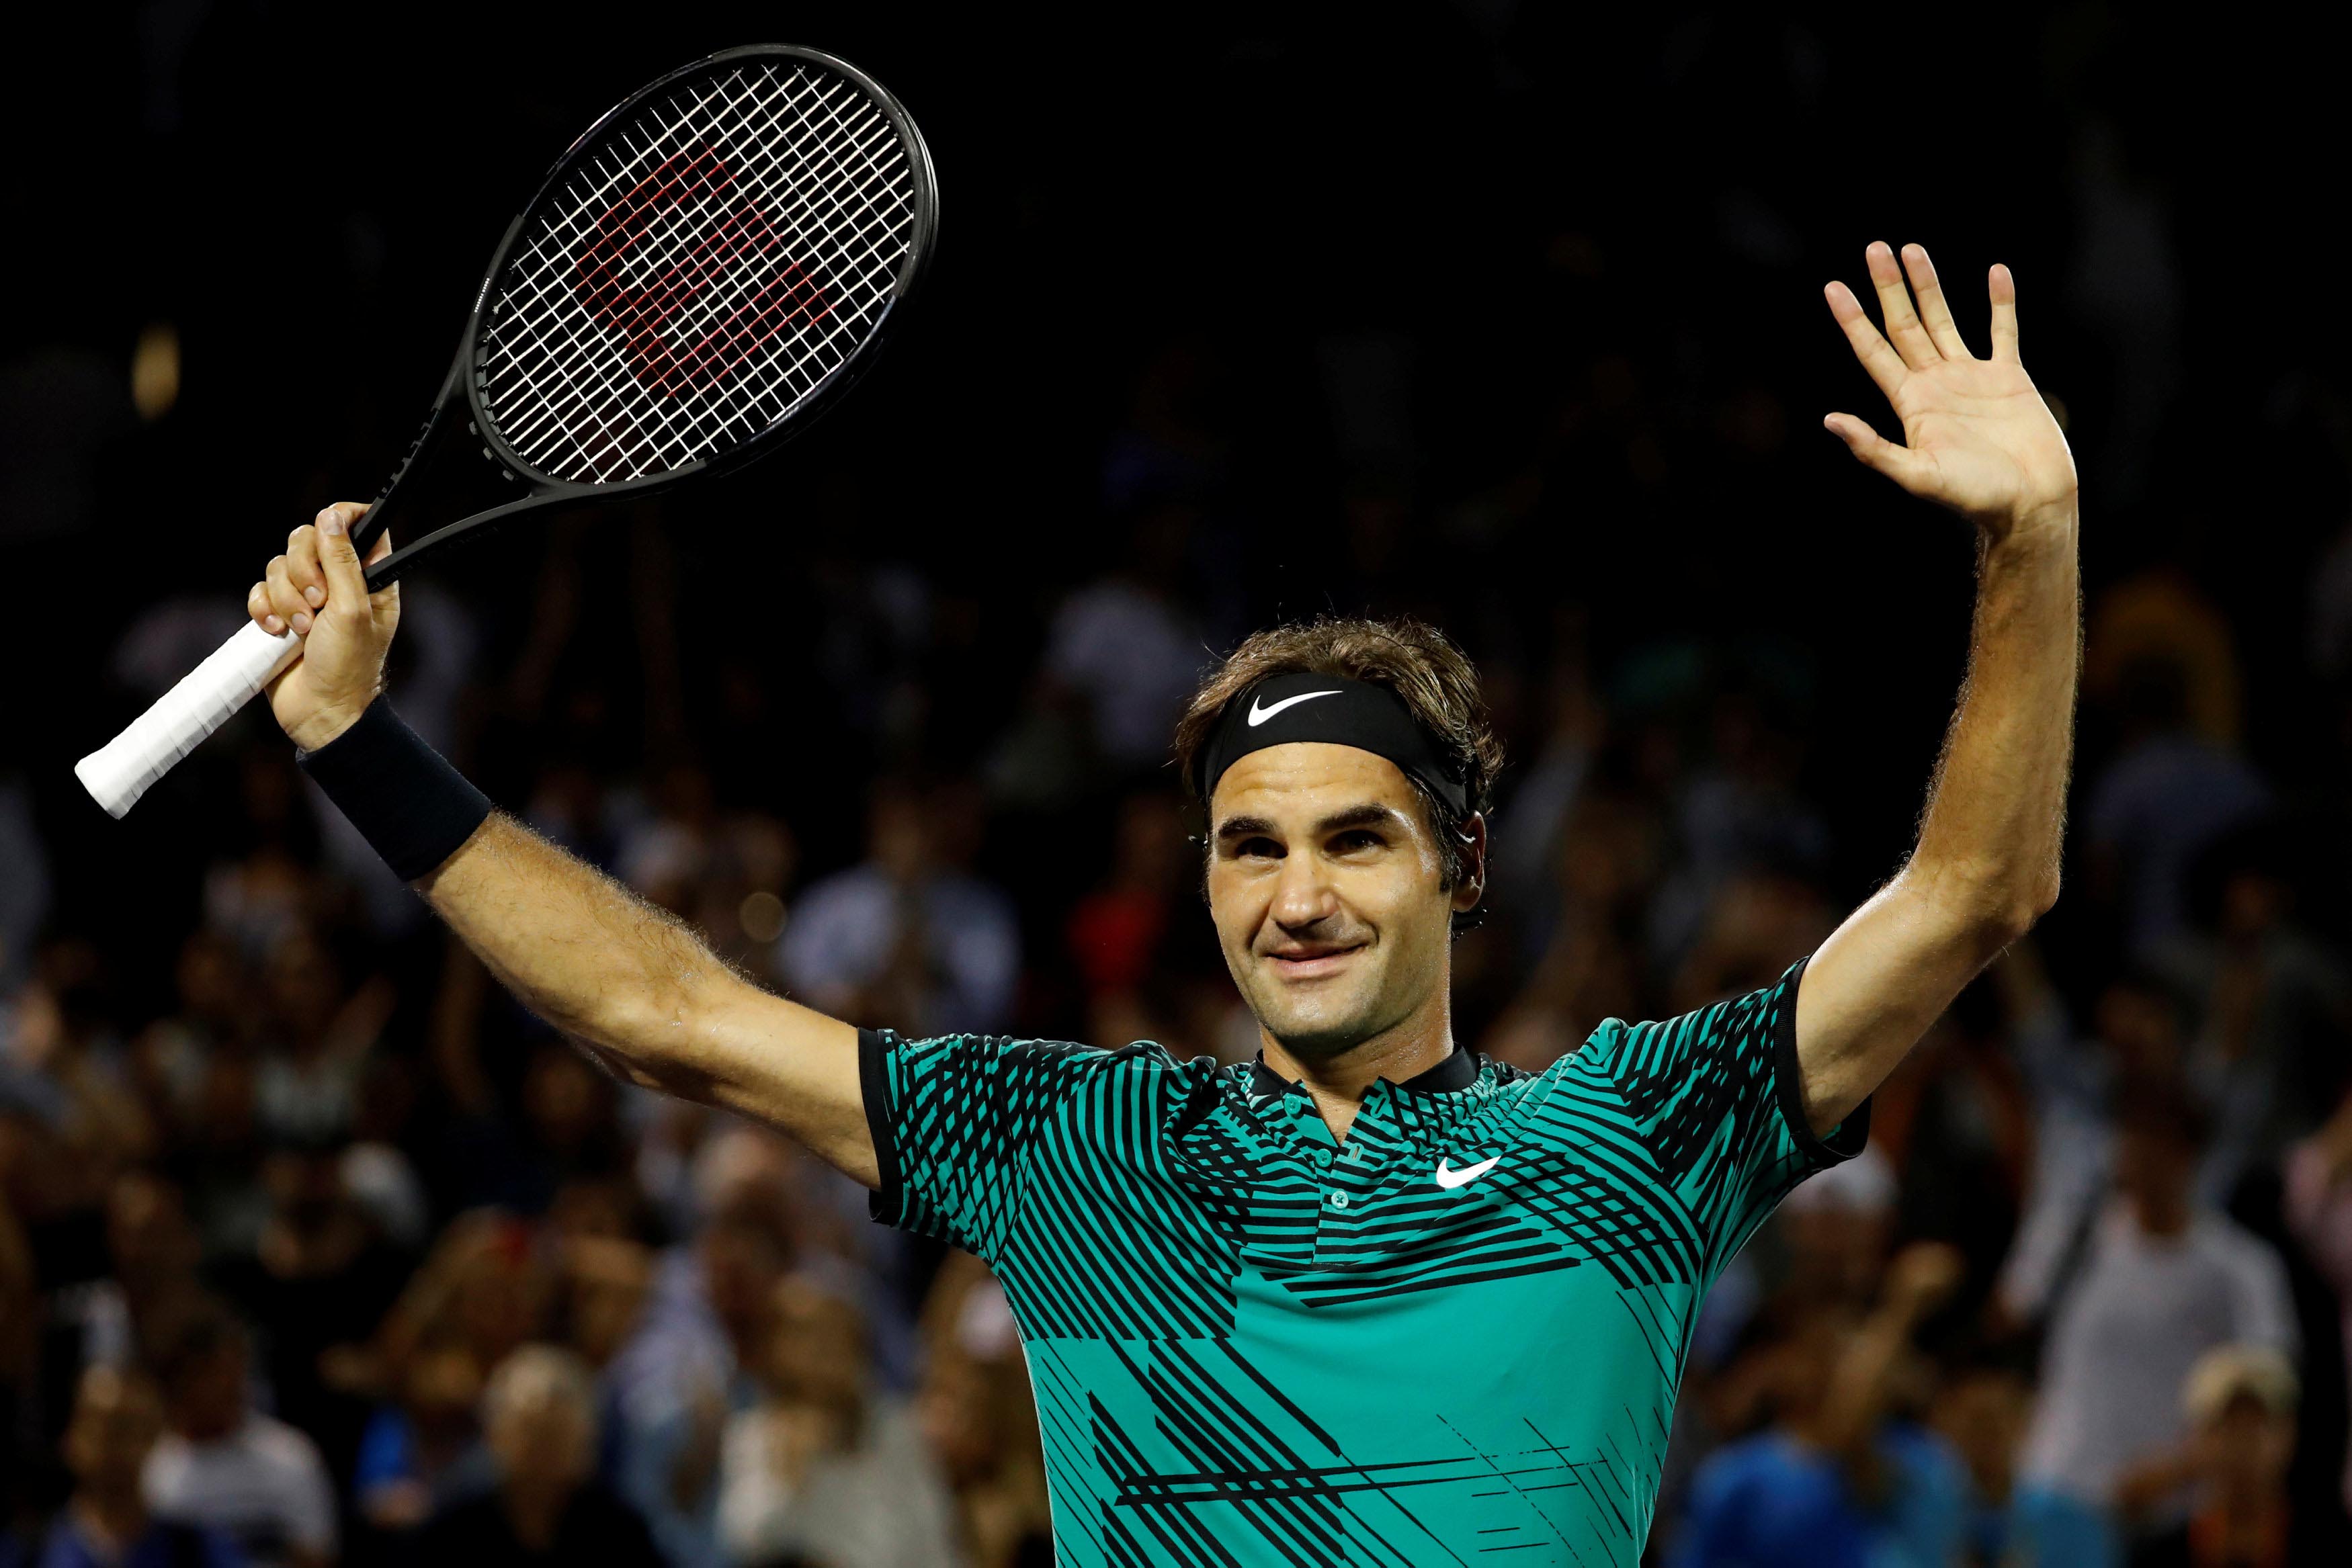 Roger Federer of Switzerland waves to the crowd after his match against Nick Kyrgios of Australia (not pictured) during a men's singles semi-final in the 2017 Miami Open at Brandon Park Tennis Center, Miami, FLorida, USA, on March 31, 2017. Photo: Geoff Burke via Reuters